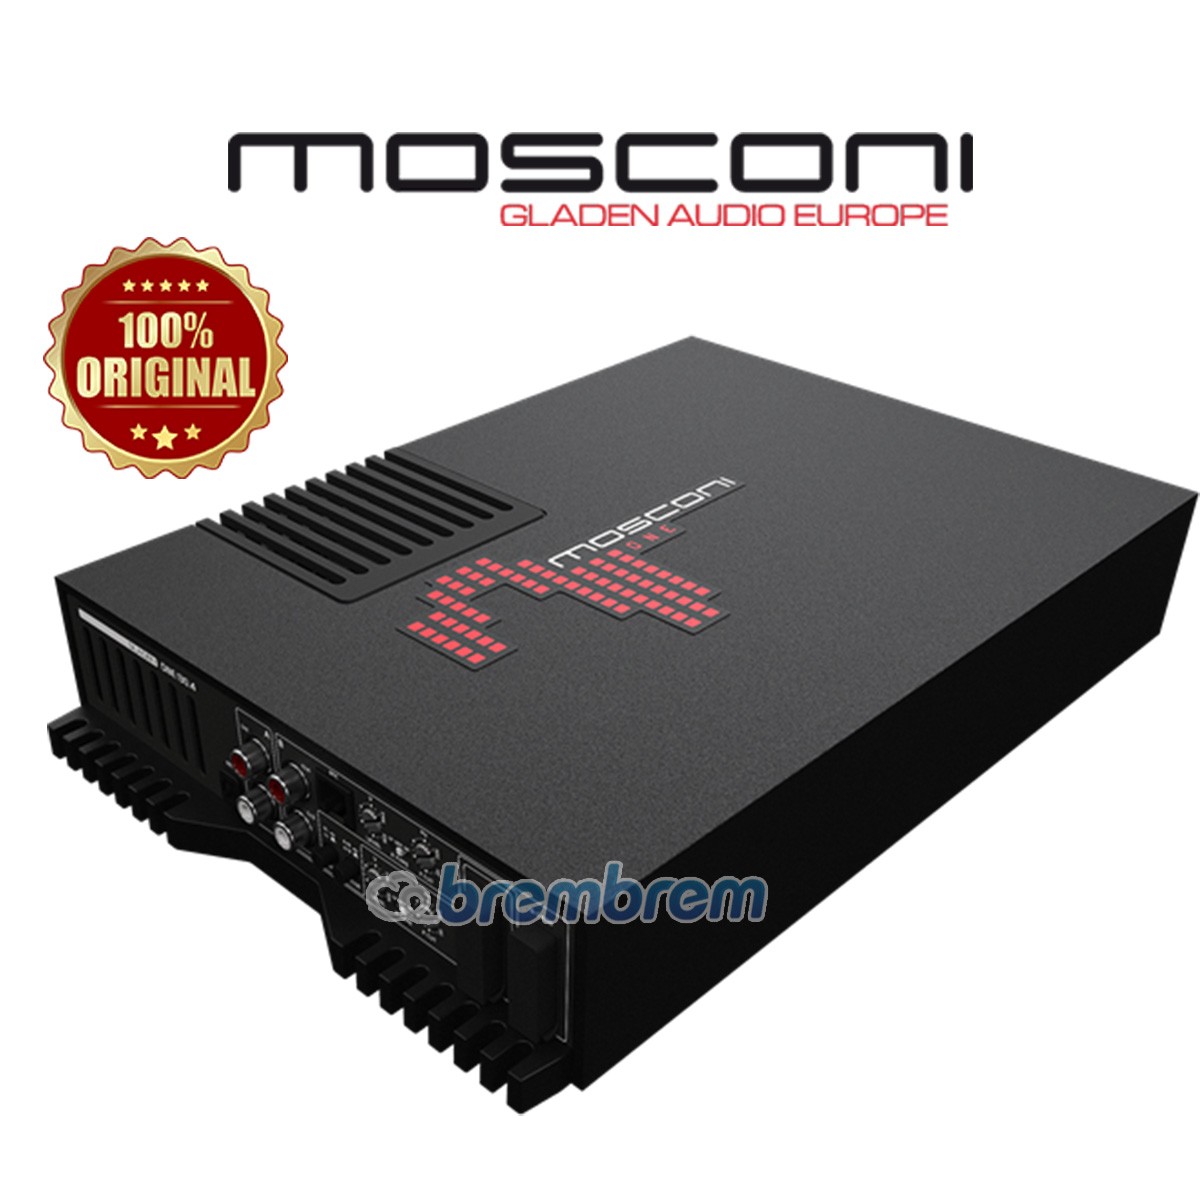 MOSCONI ONE 130.4 - POWER 4 CHANNEL